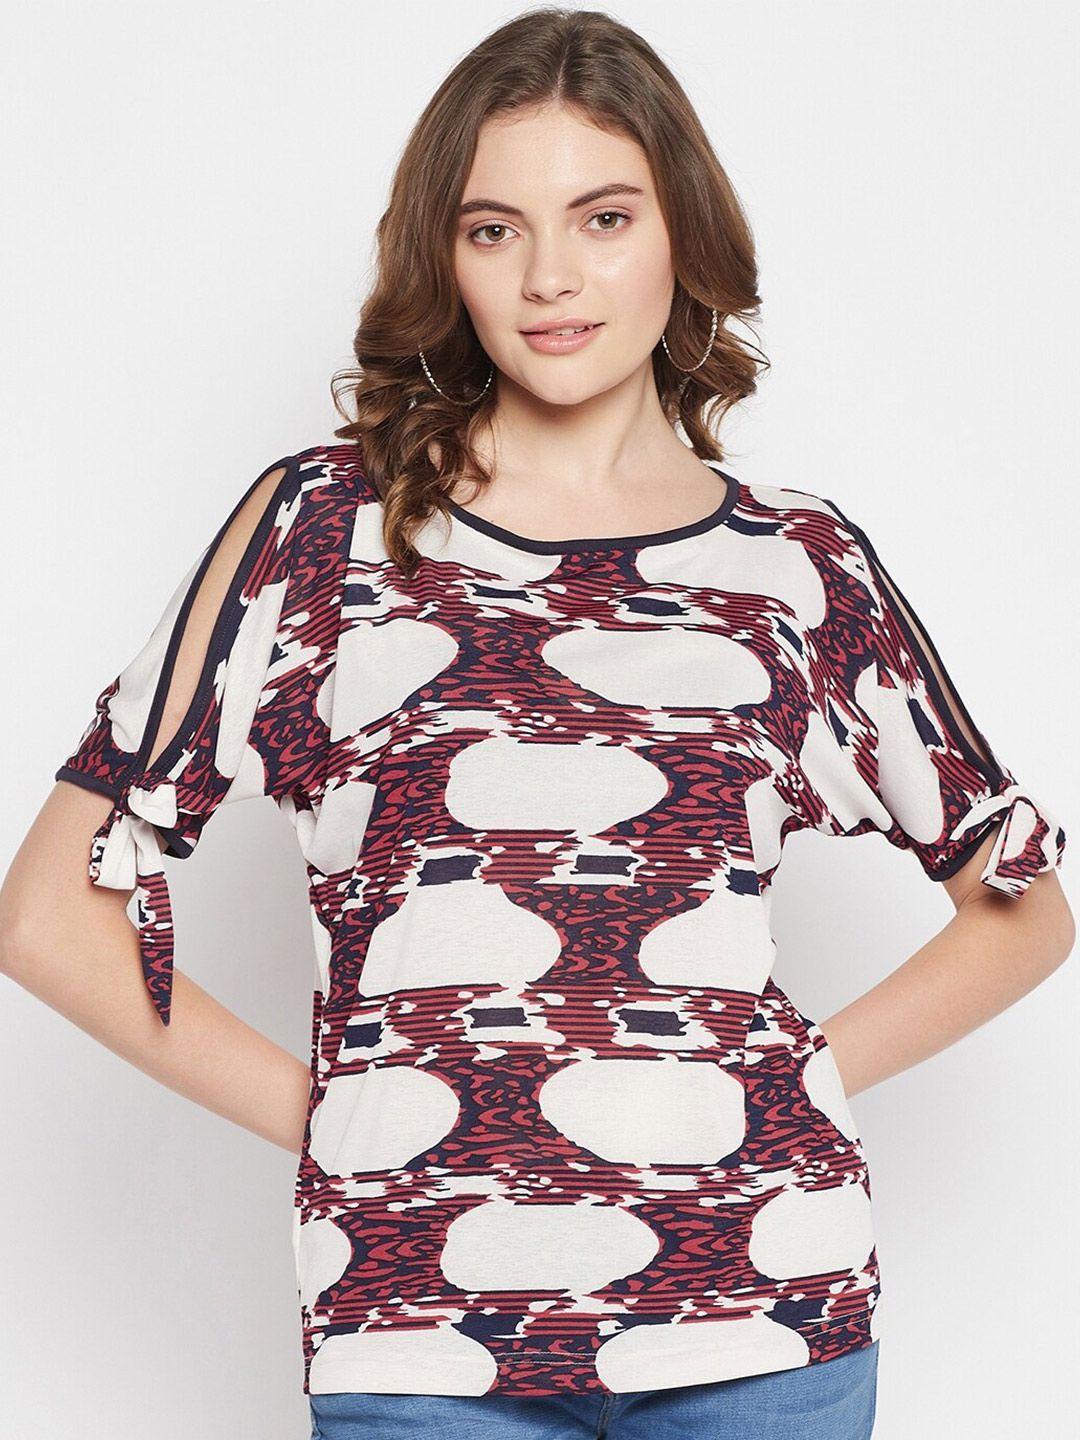 crozo by cantabil women maroon & white abstract printed top